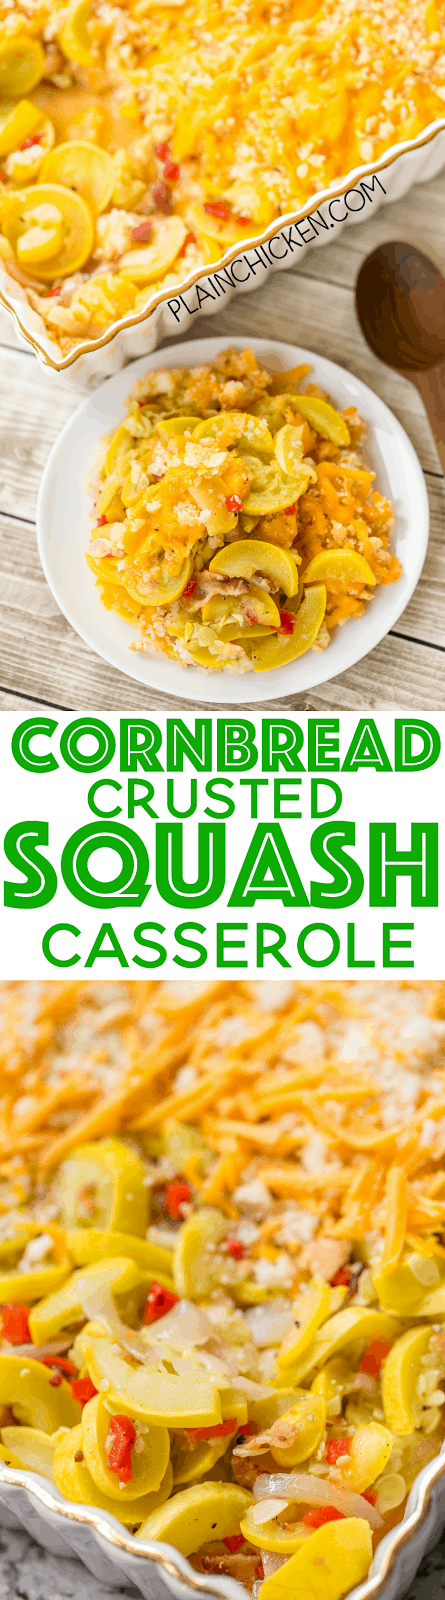 Cornbread Crusted Squash Casserole - so delicious!!! Easy homemade squash casserole topped with a cheddar and cornbread crust. Everyone went back for seconds. Onion, Squash, pimentos, bacon, cornbread and cheddar cheese. Can make ahead of time and refrigerate until ready to bake. Great side dish recipe for potlucks and cookouts. 